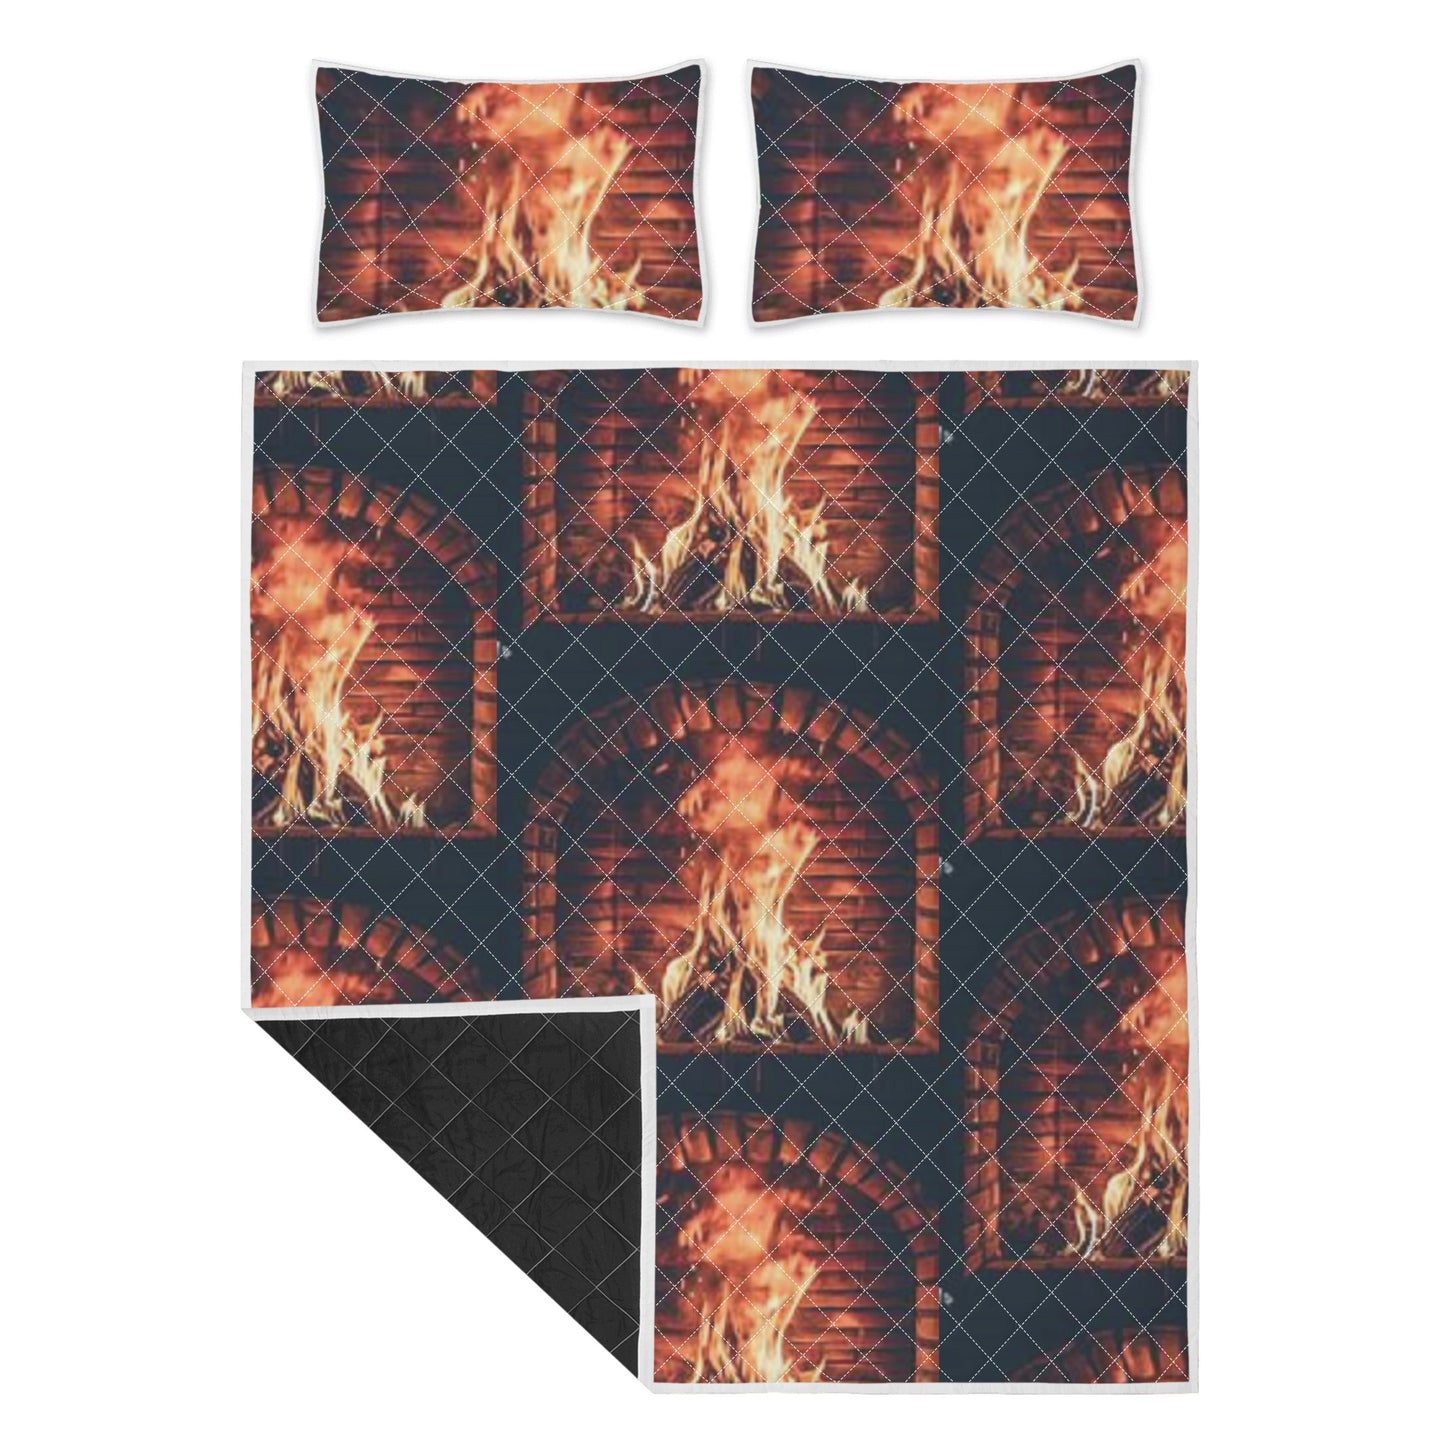 The B.E. Style Brand Keep The Fire Burning For Me Quilt Set